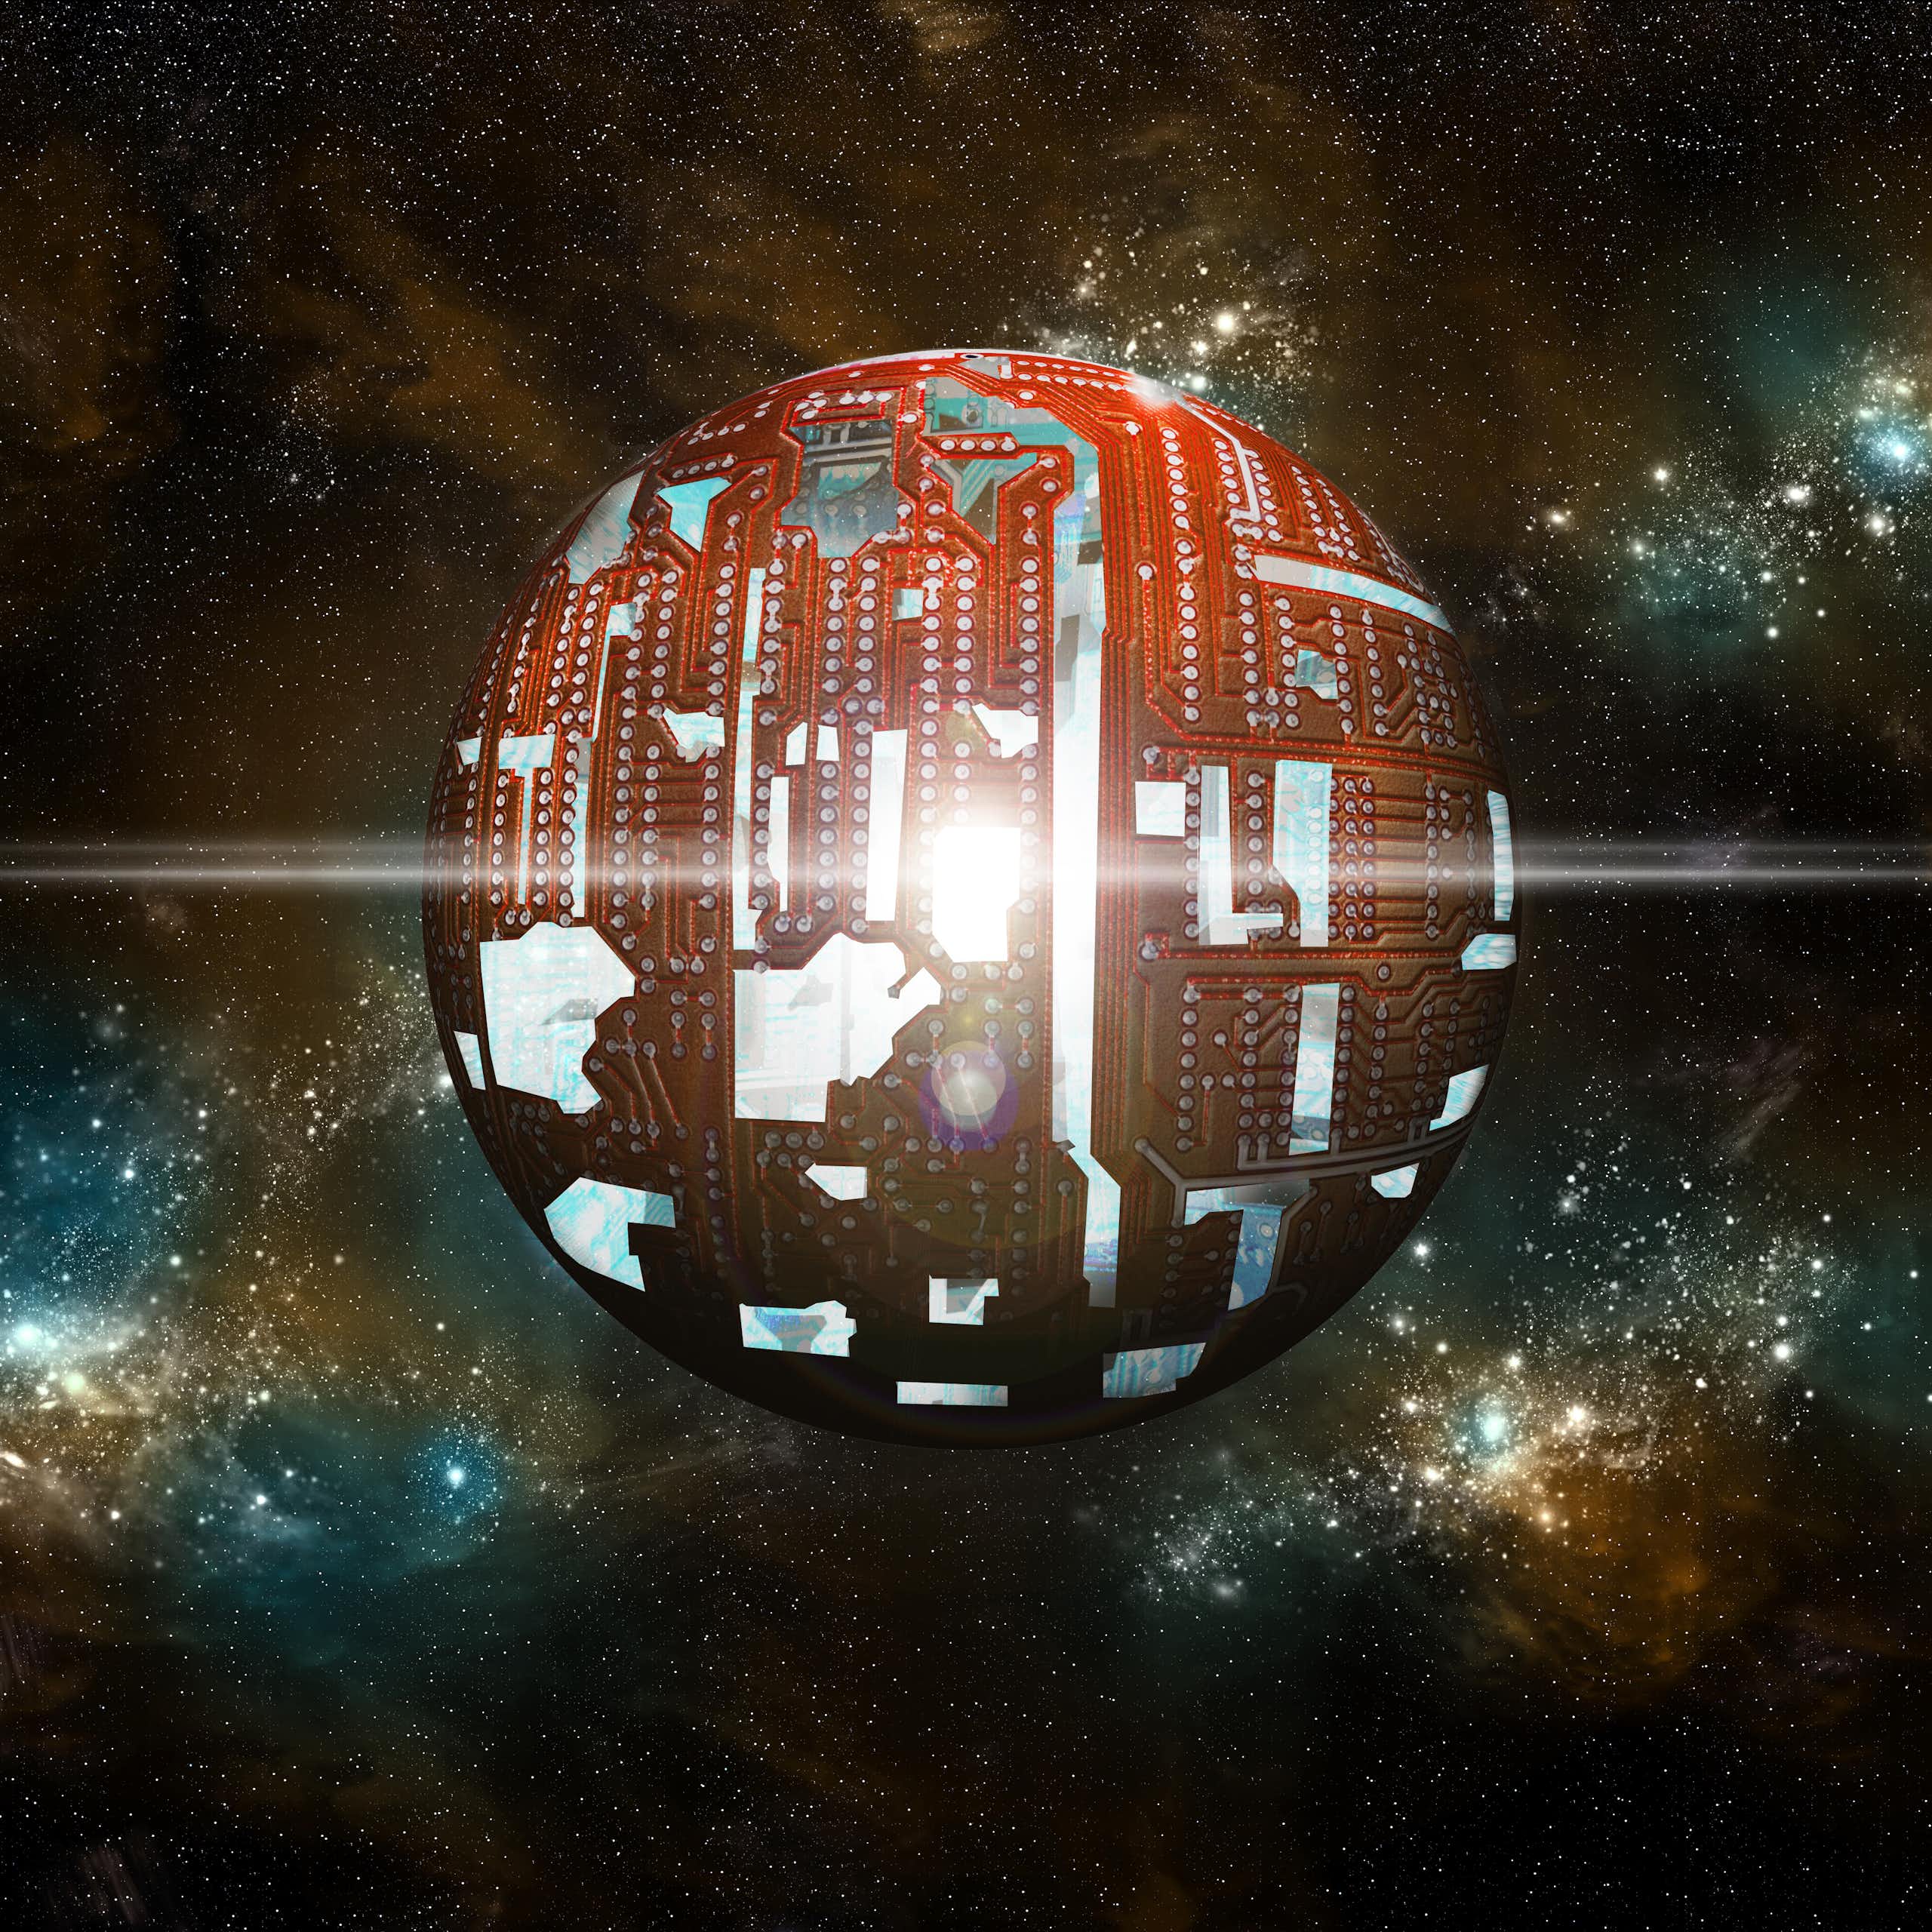 Artist's impression of a Dyson sphere.